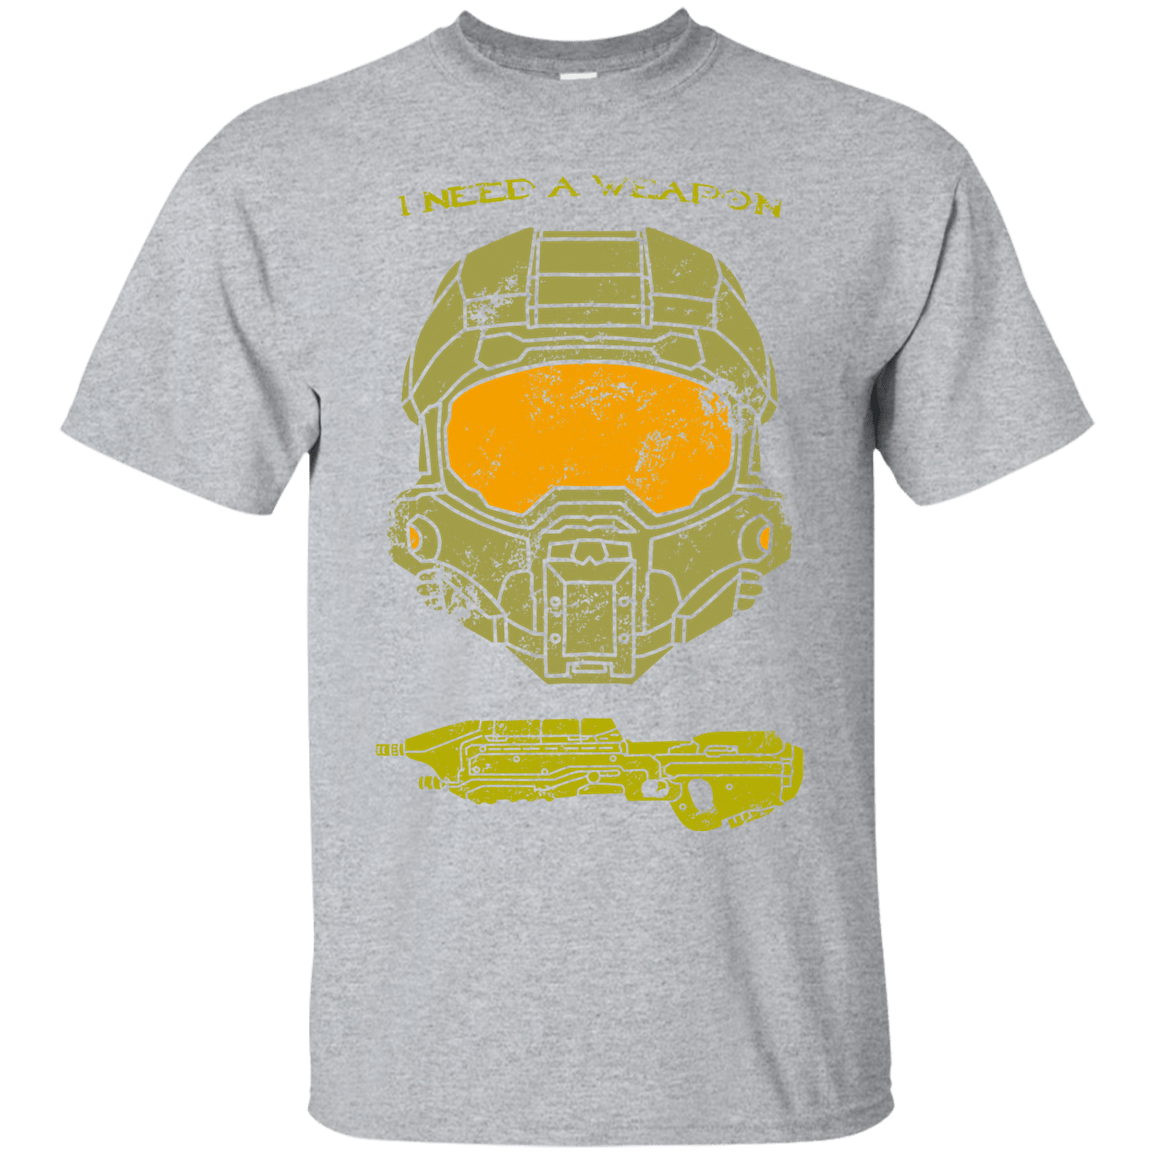 T-Shirts Sport Grey / S Need a Weapon T-Shirt